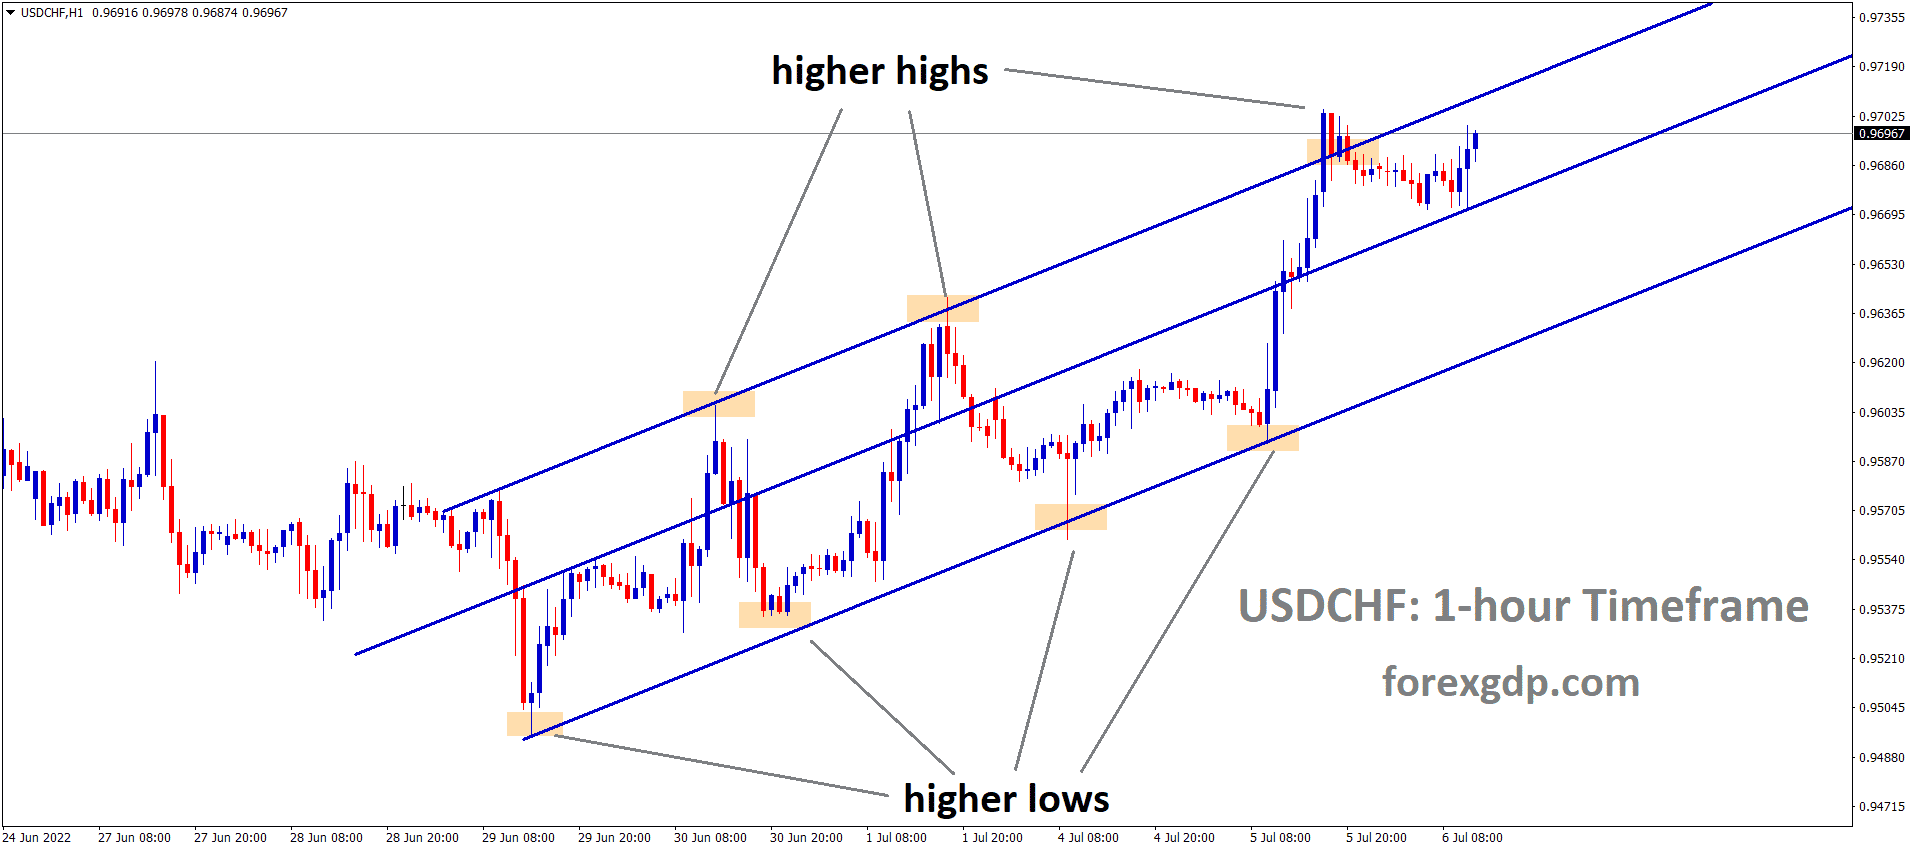 USDCHF is moving in an Ascending channel and the Market has rebounded from the higher Low area of the channel 1